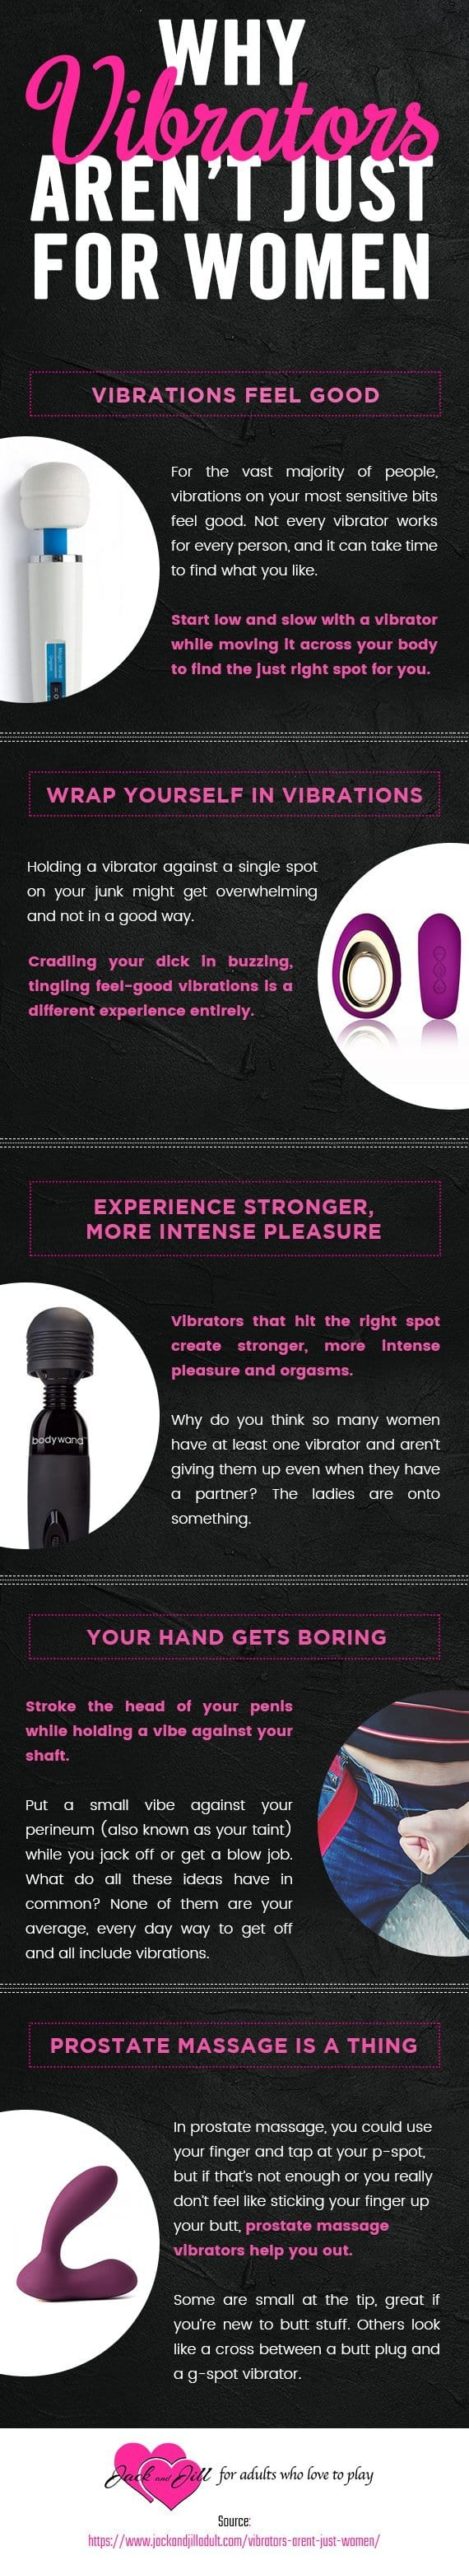 Infographic on why men can and should enjoy vibrators